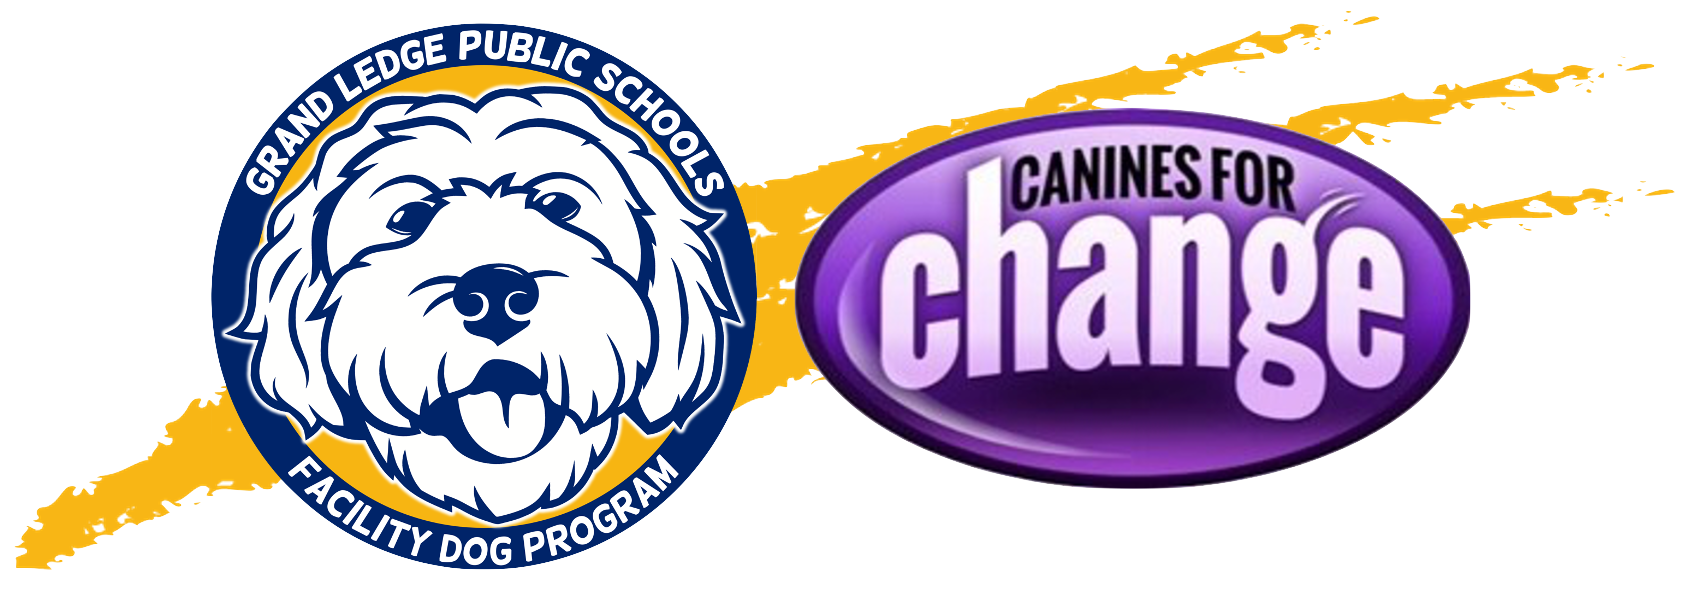 GLPS Facility Dog Program and Canines for Change